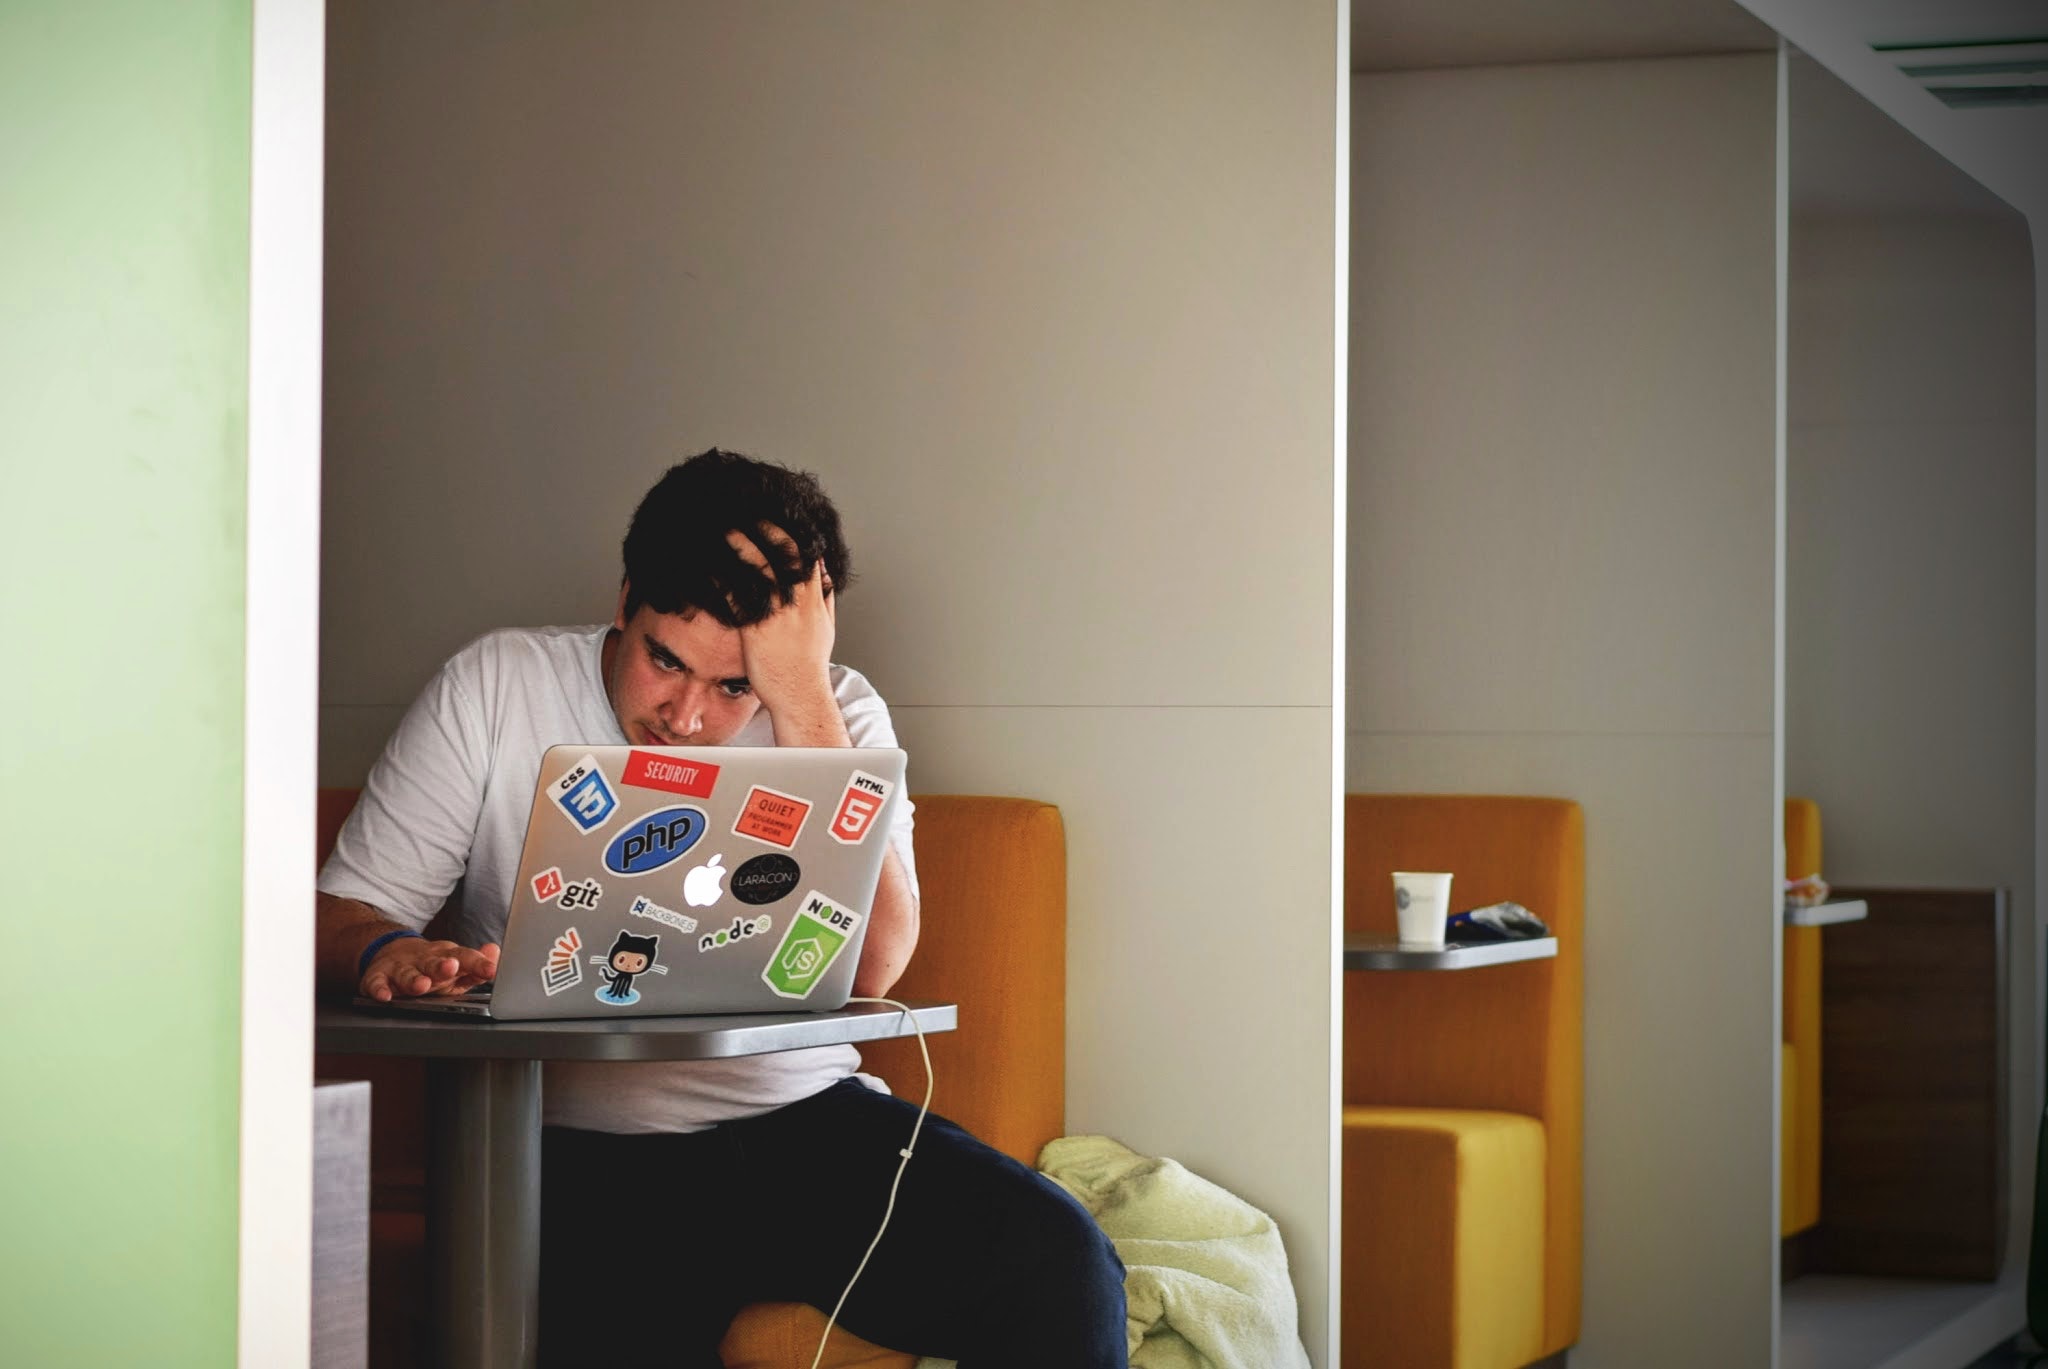 Image of an annoyed man using a laptop